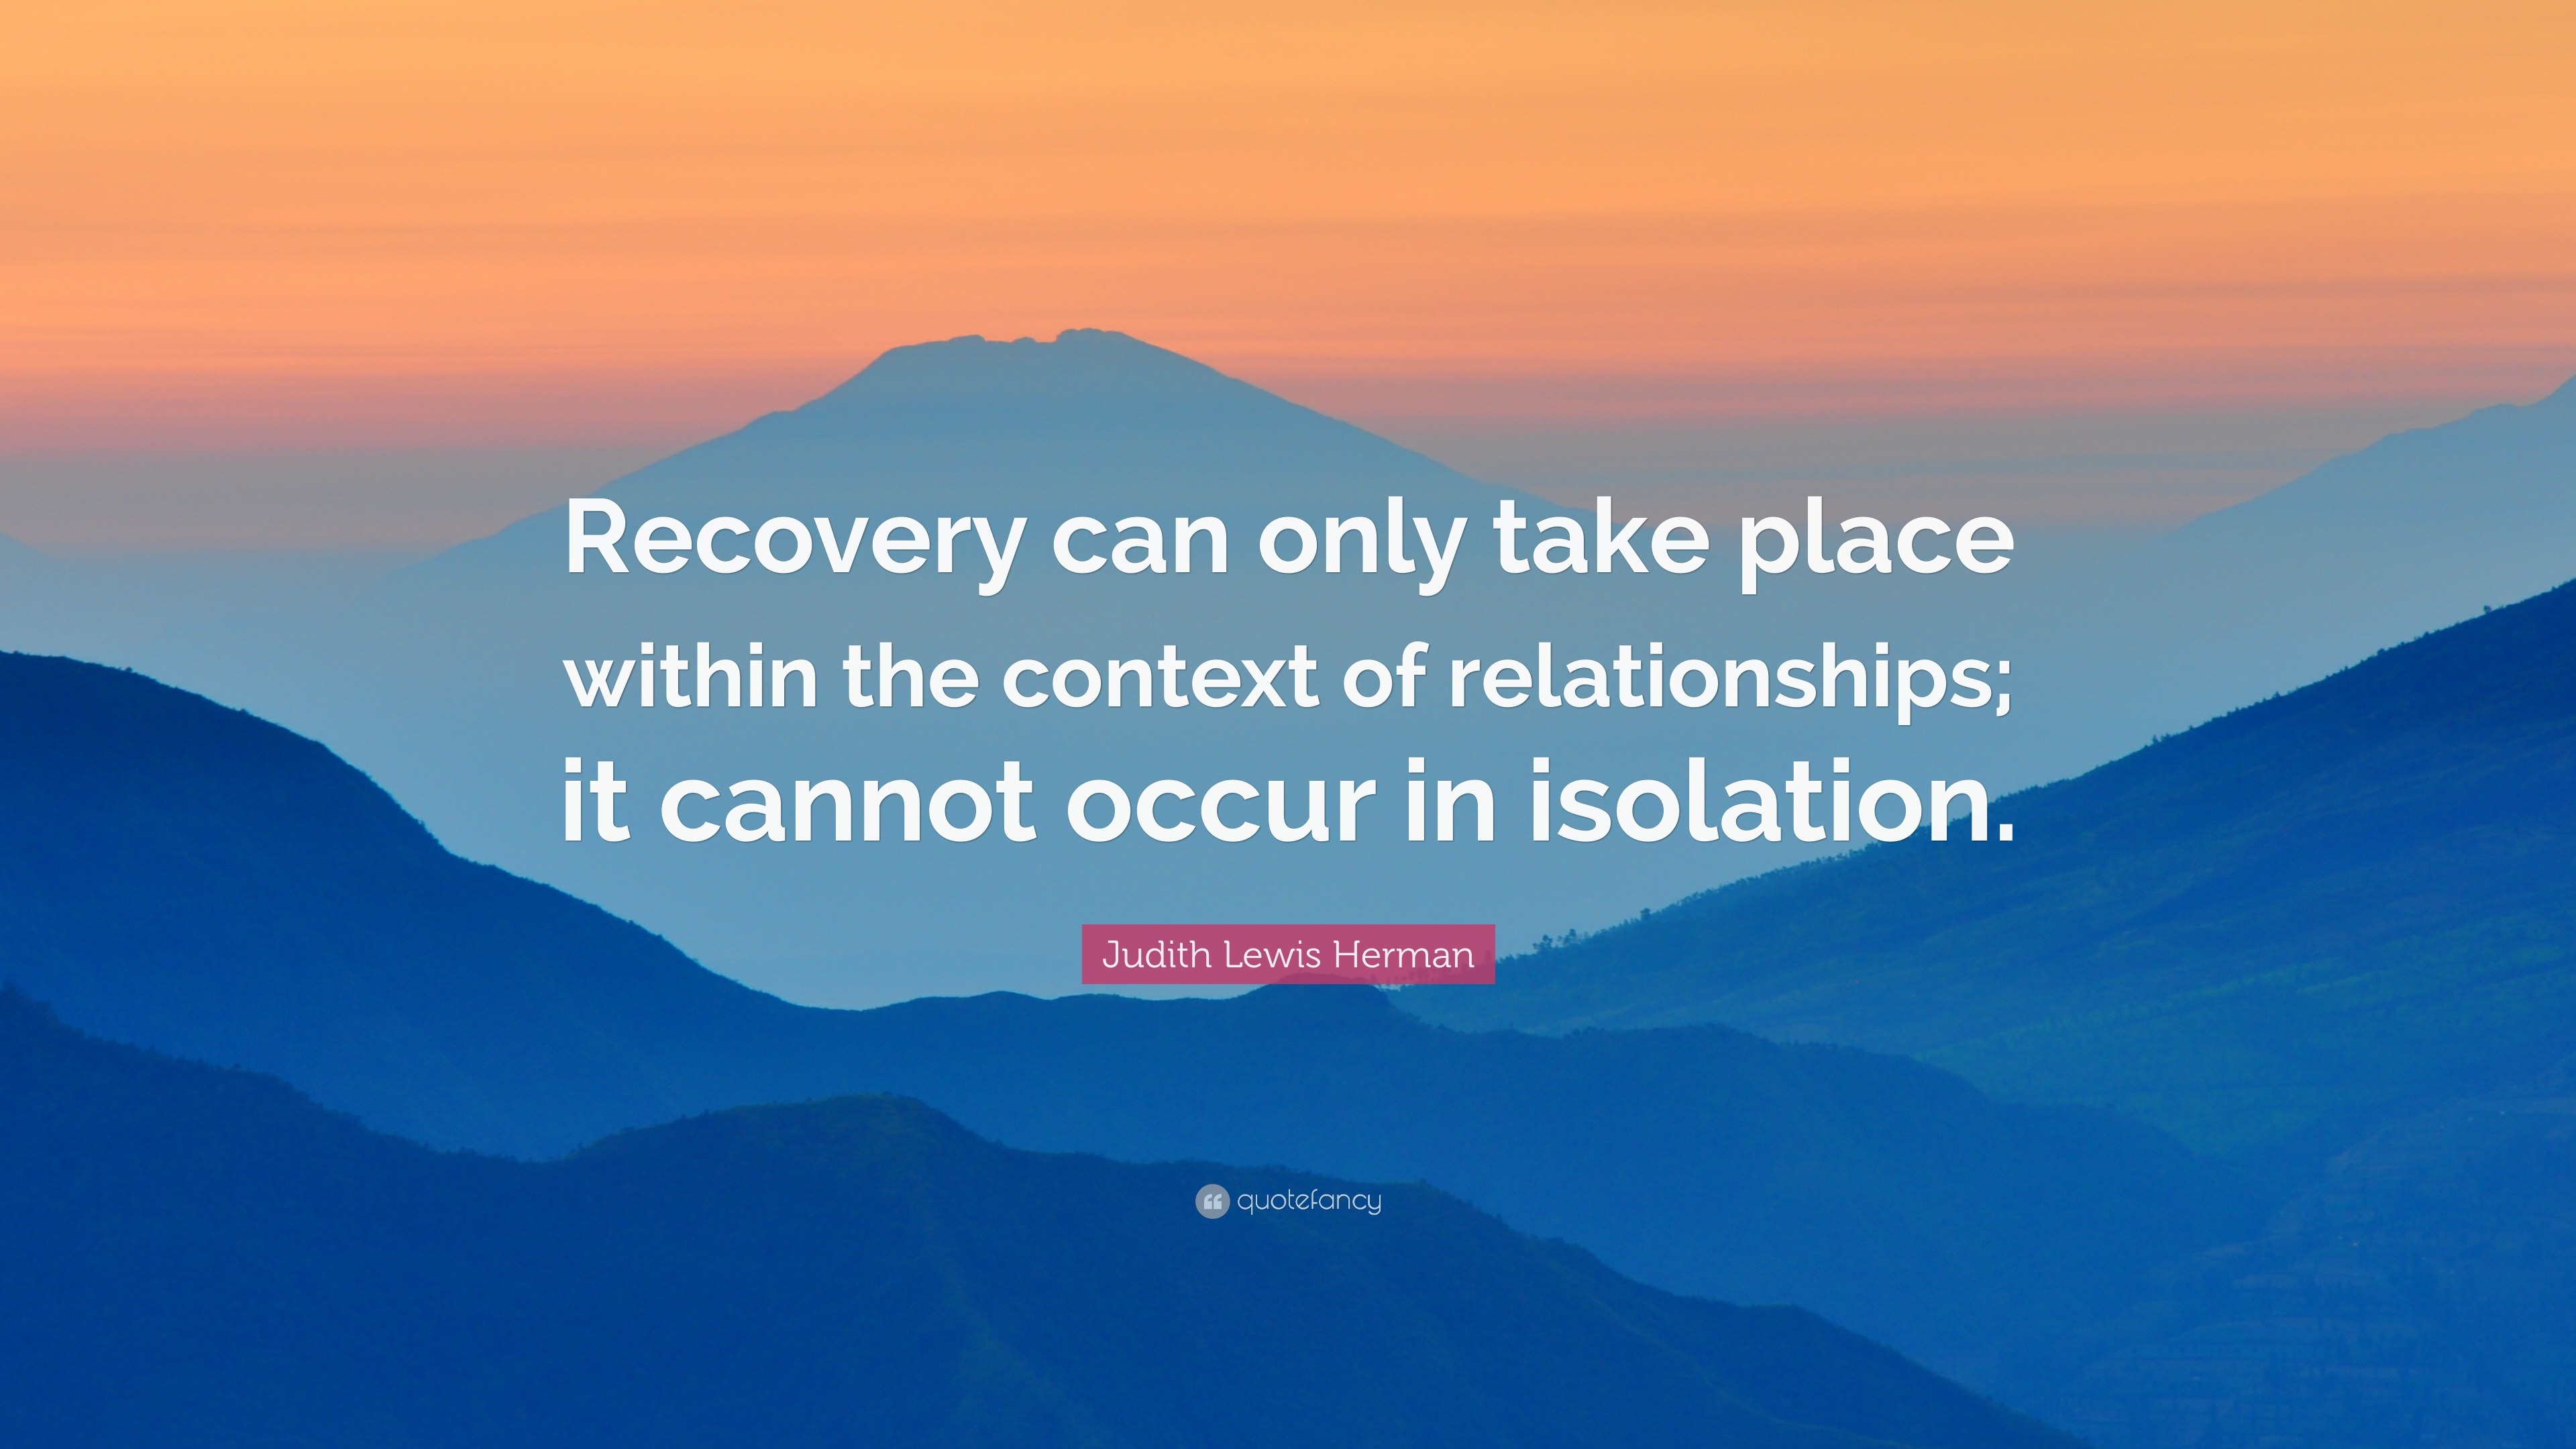 Trauma And Recovery by Judith Lewis Herman